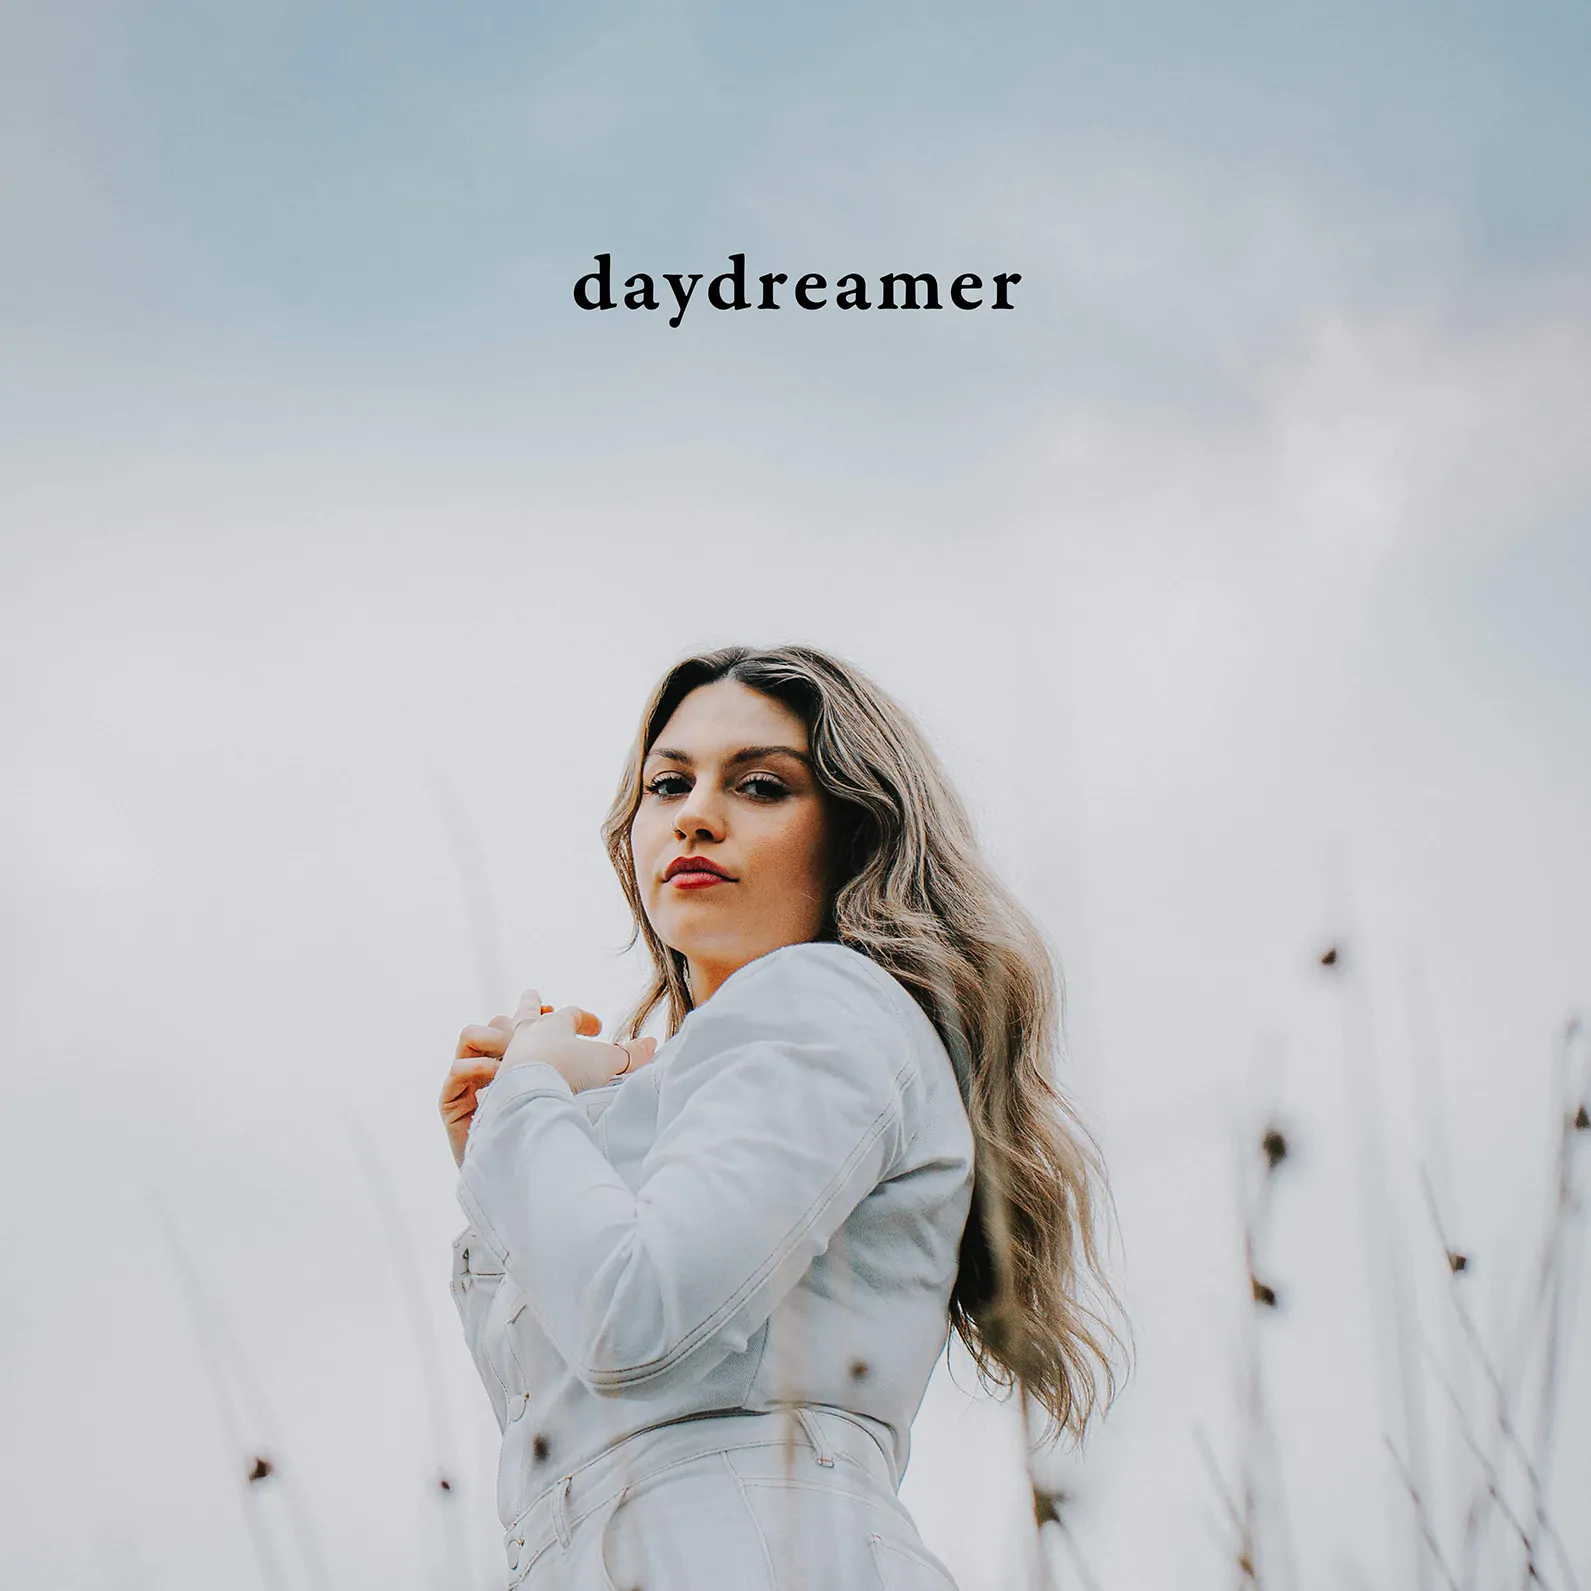 REEVAH releases her brand new single ‘daydreamer’ – Listen Now!